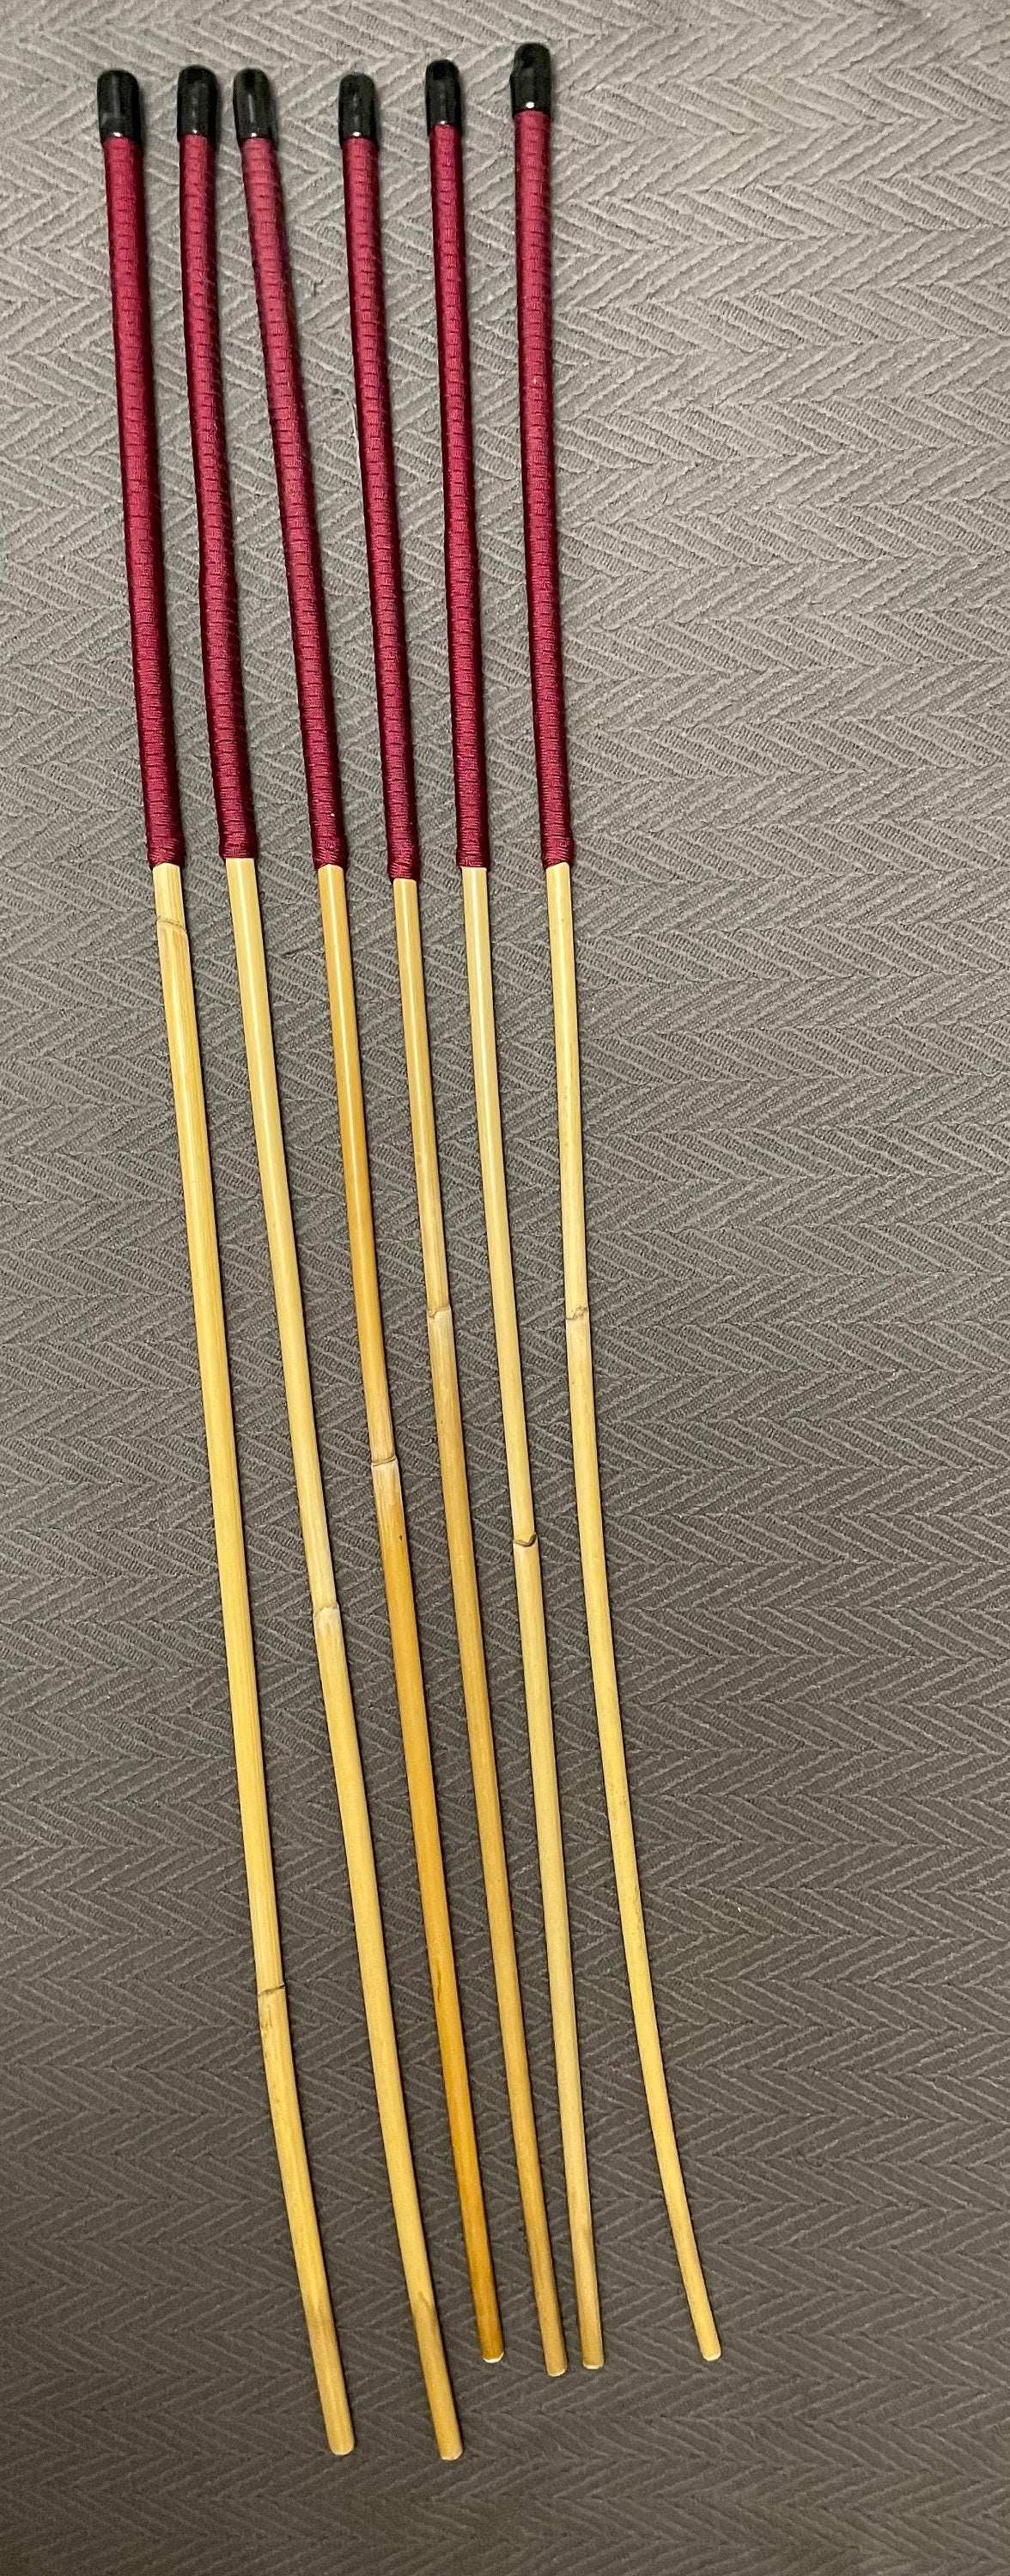 Set of 6 Classic Dragon Rattan Punishment Canes / School Canes  with Burgundy Paracord Handles